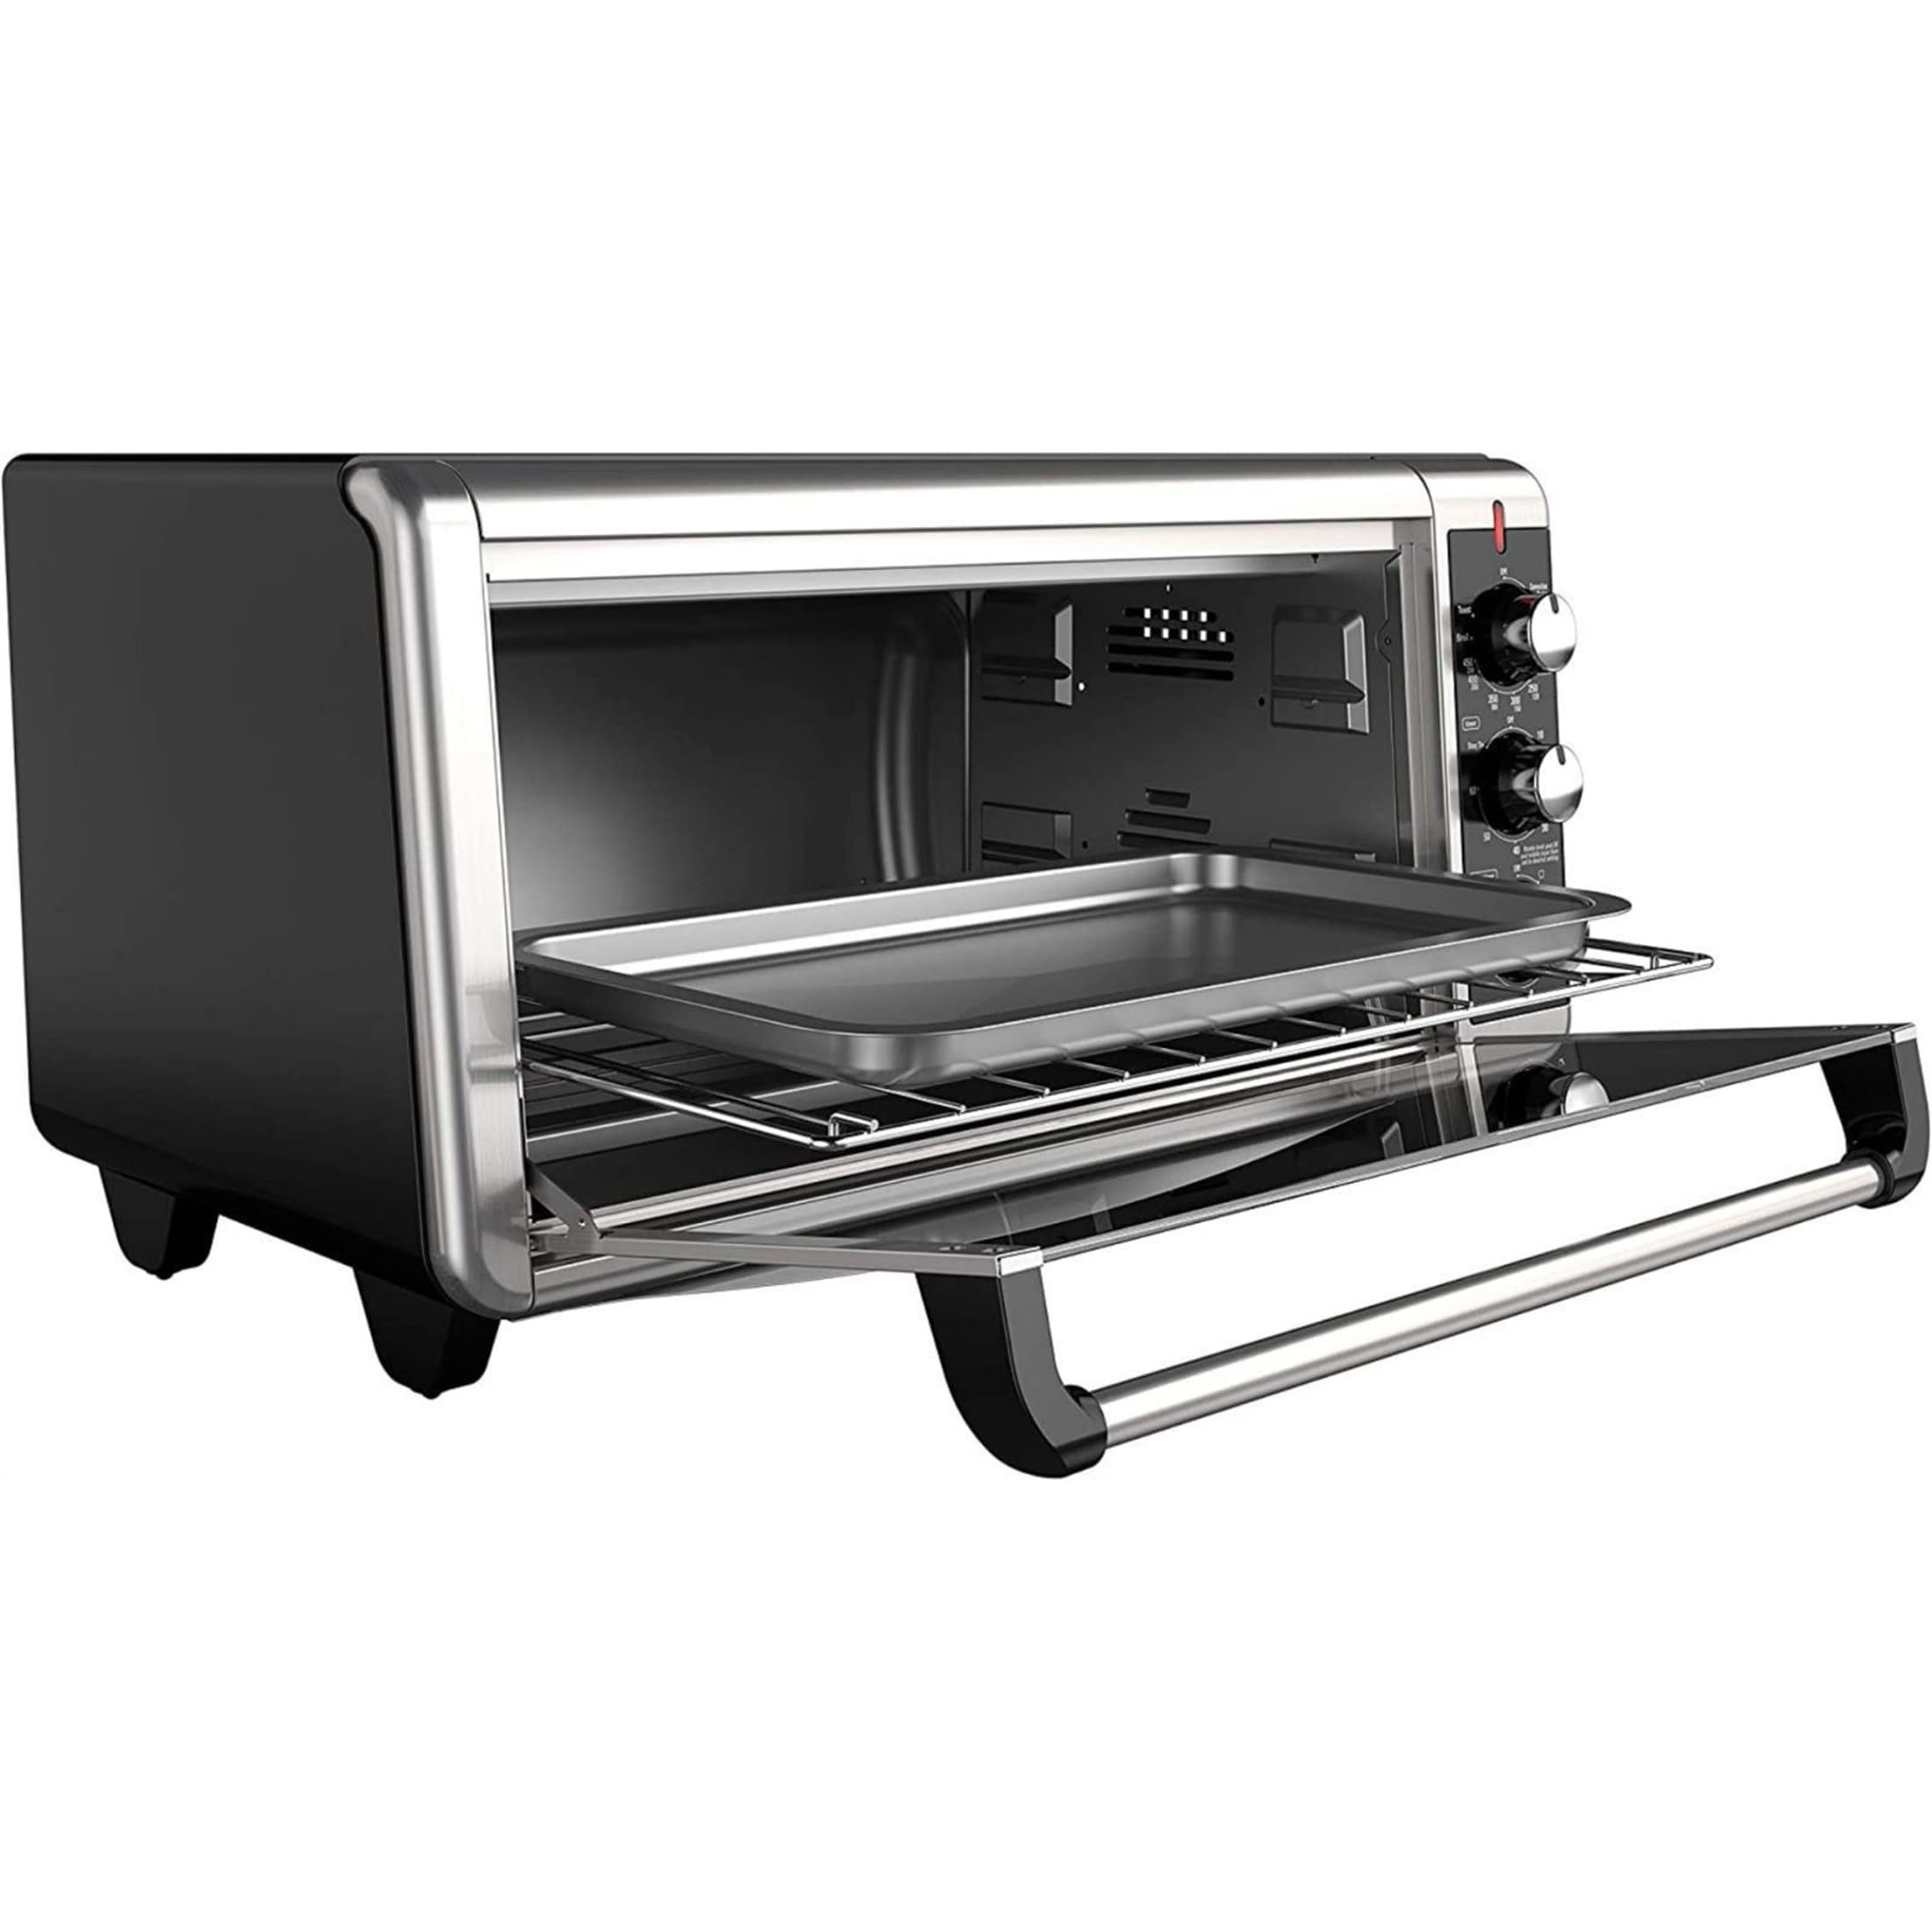 https://ak1.ostkcdn.com/images/products/is/images/direct/cfc6eb326961da34c0255973ec0cfe050e3494d8/1500W-8-Slice-Stainless-Steel-Toaster-Oven-with-Grill.jpg